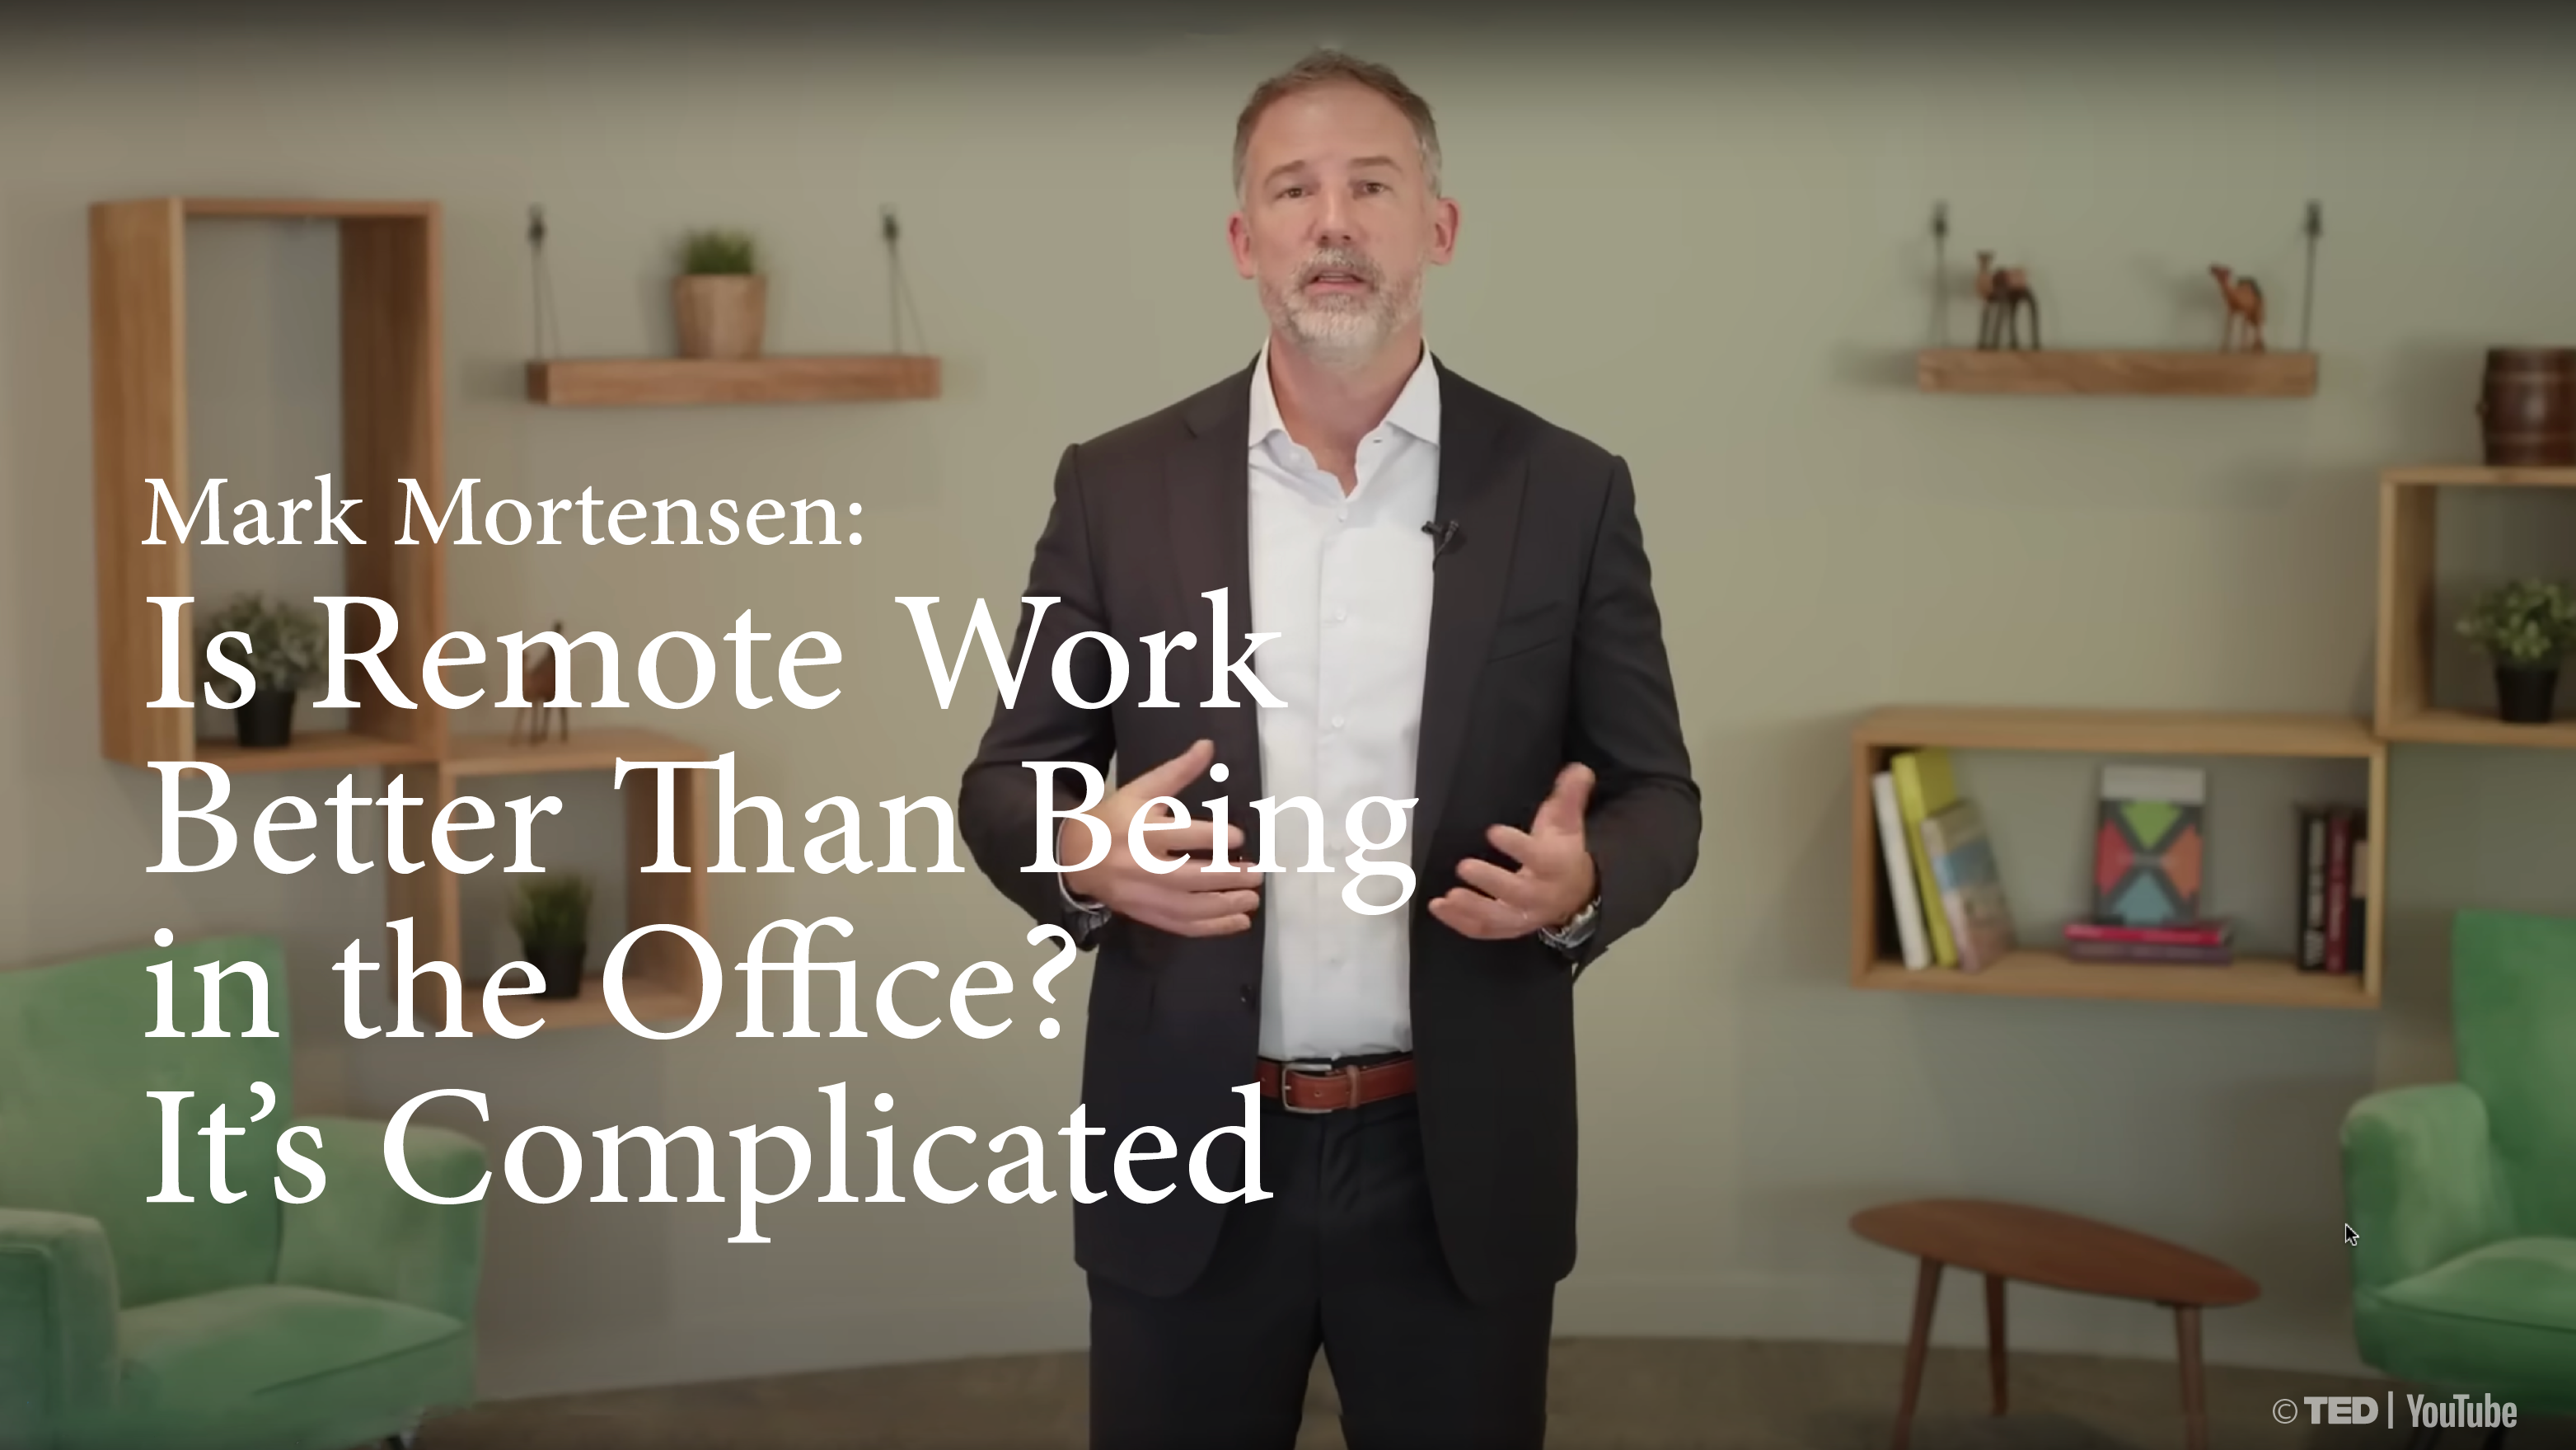 [B+] Is Remote Work Better Than Being in the Office? It's Complicated [PRACTICE]